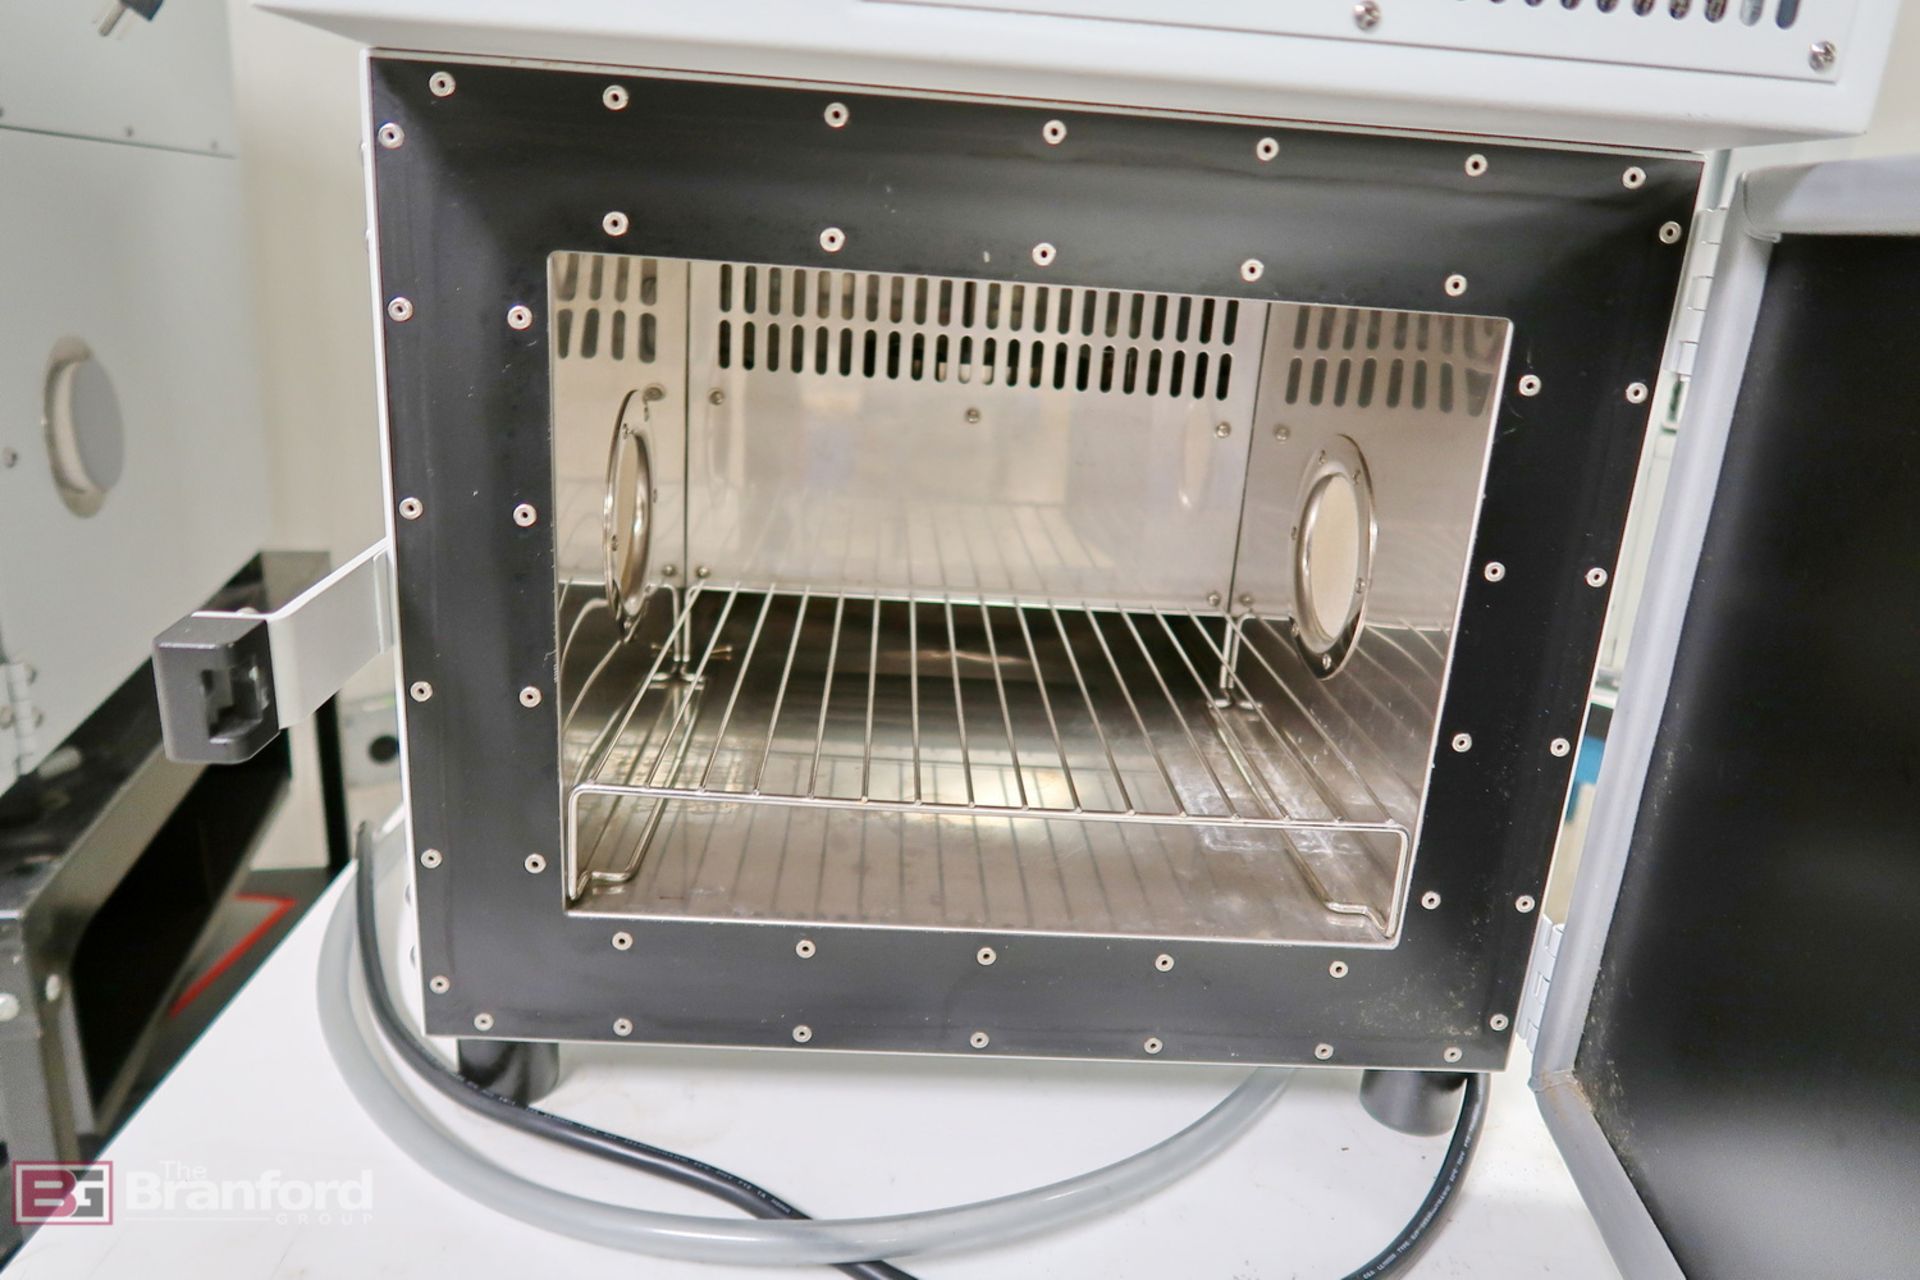 Test Equity 107 test chamber - Image 3 of 4